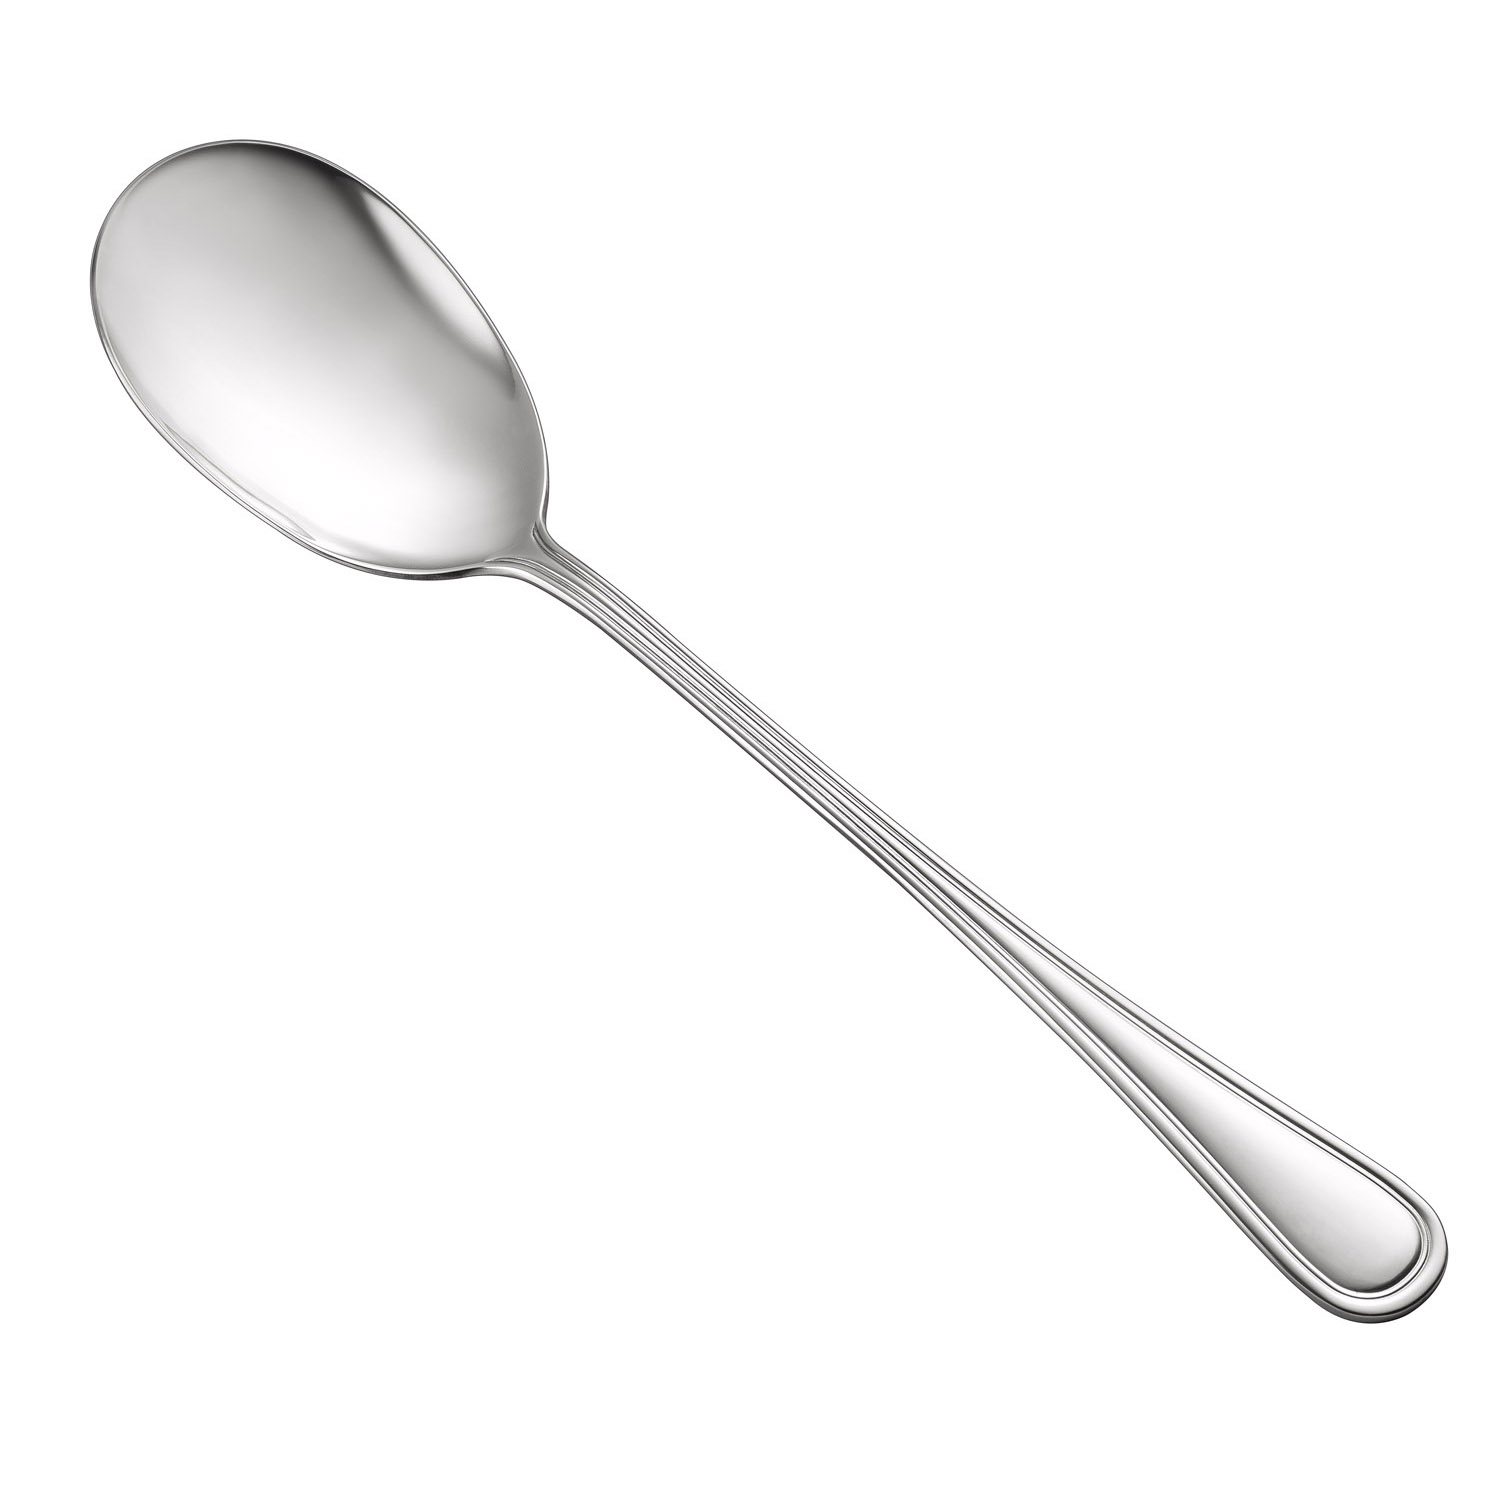 CAC China 8002-19 Elite Solid Spoon, Extra Heavyweight 18/8, 11-1/2"